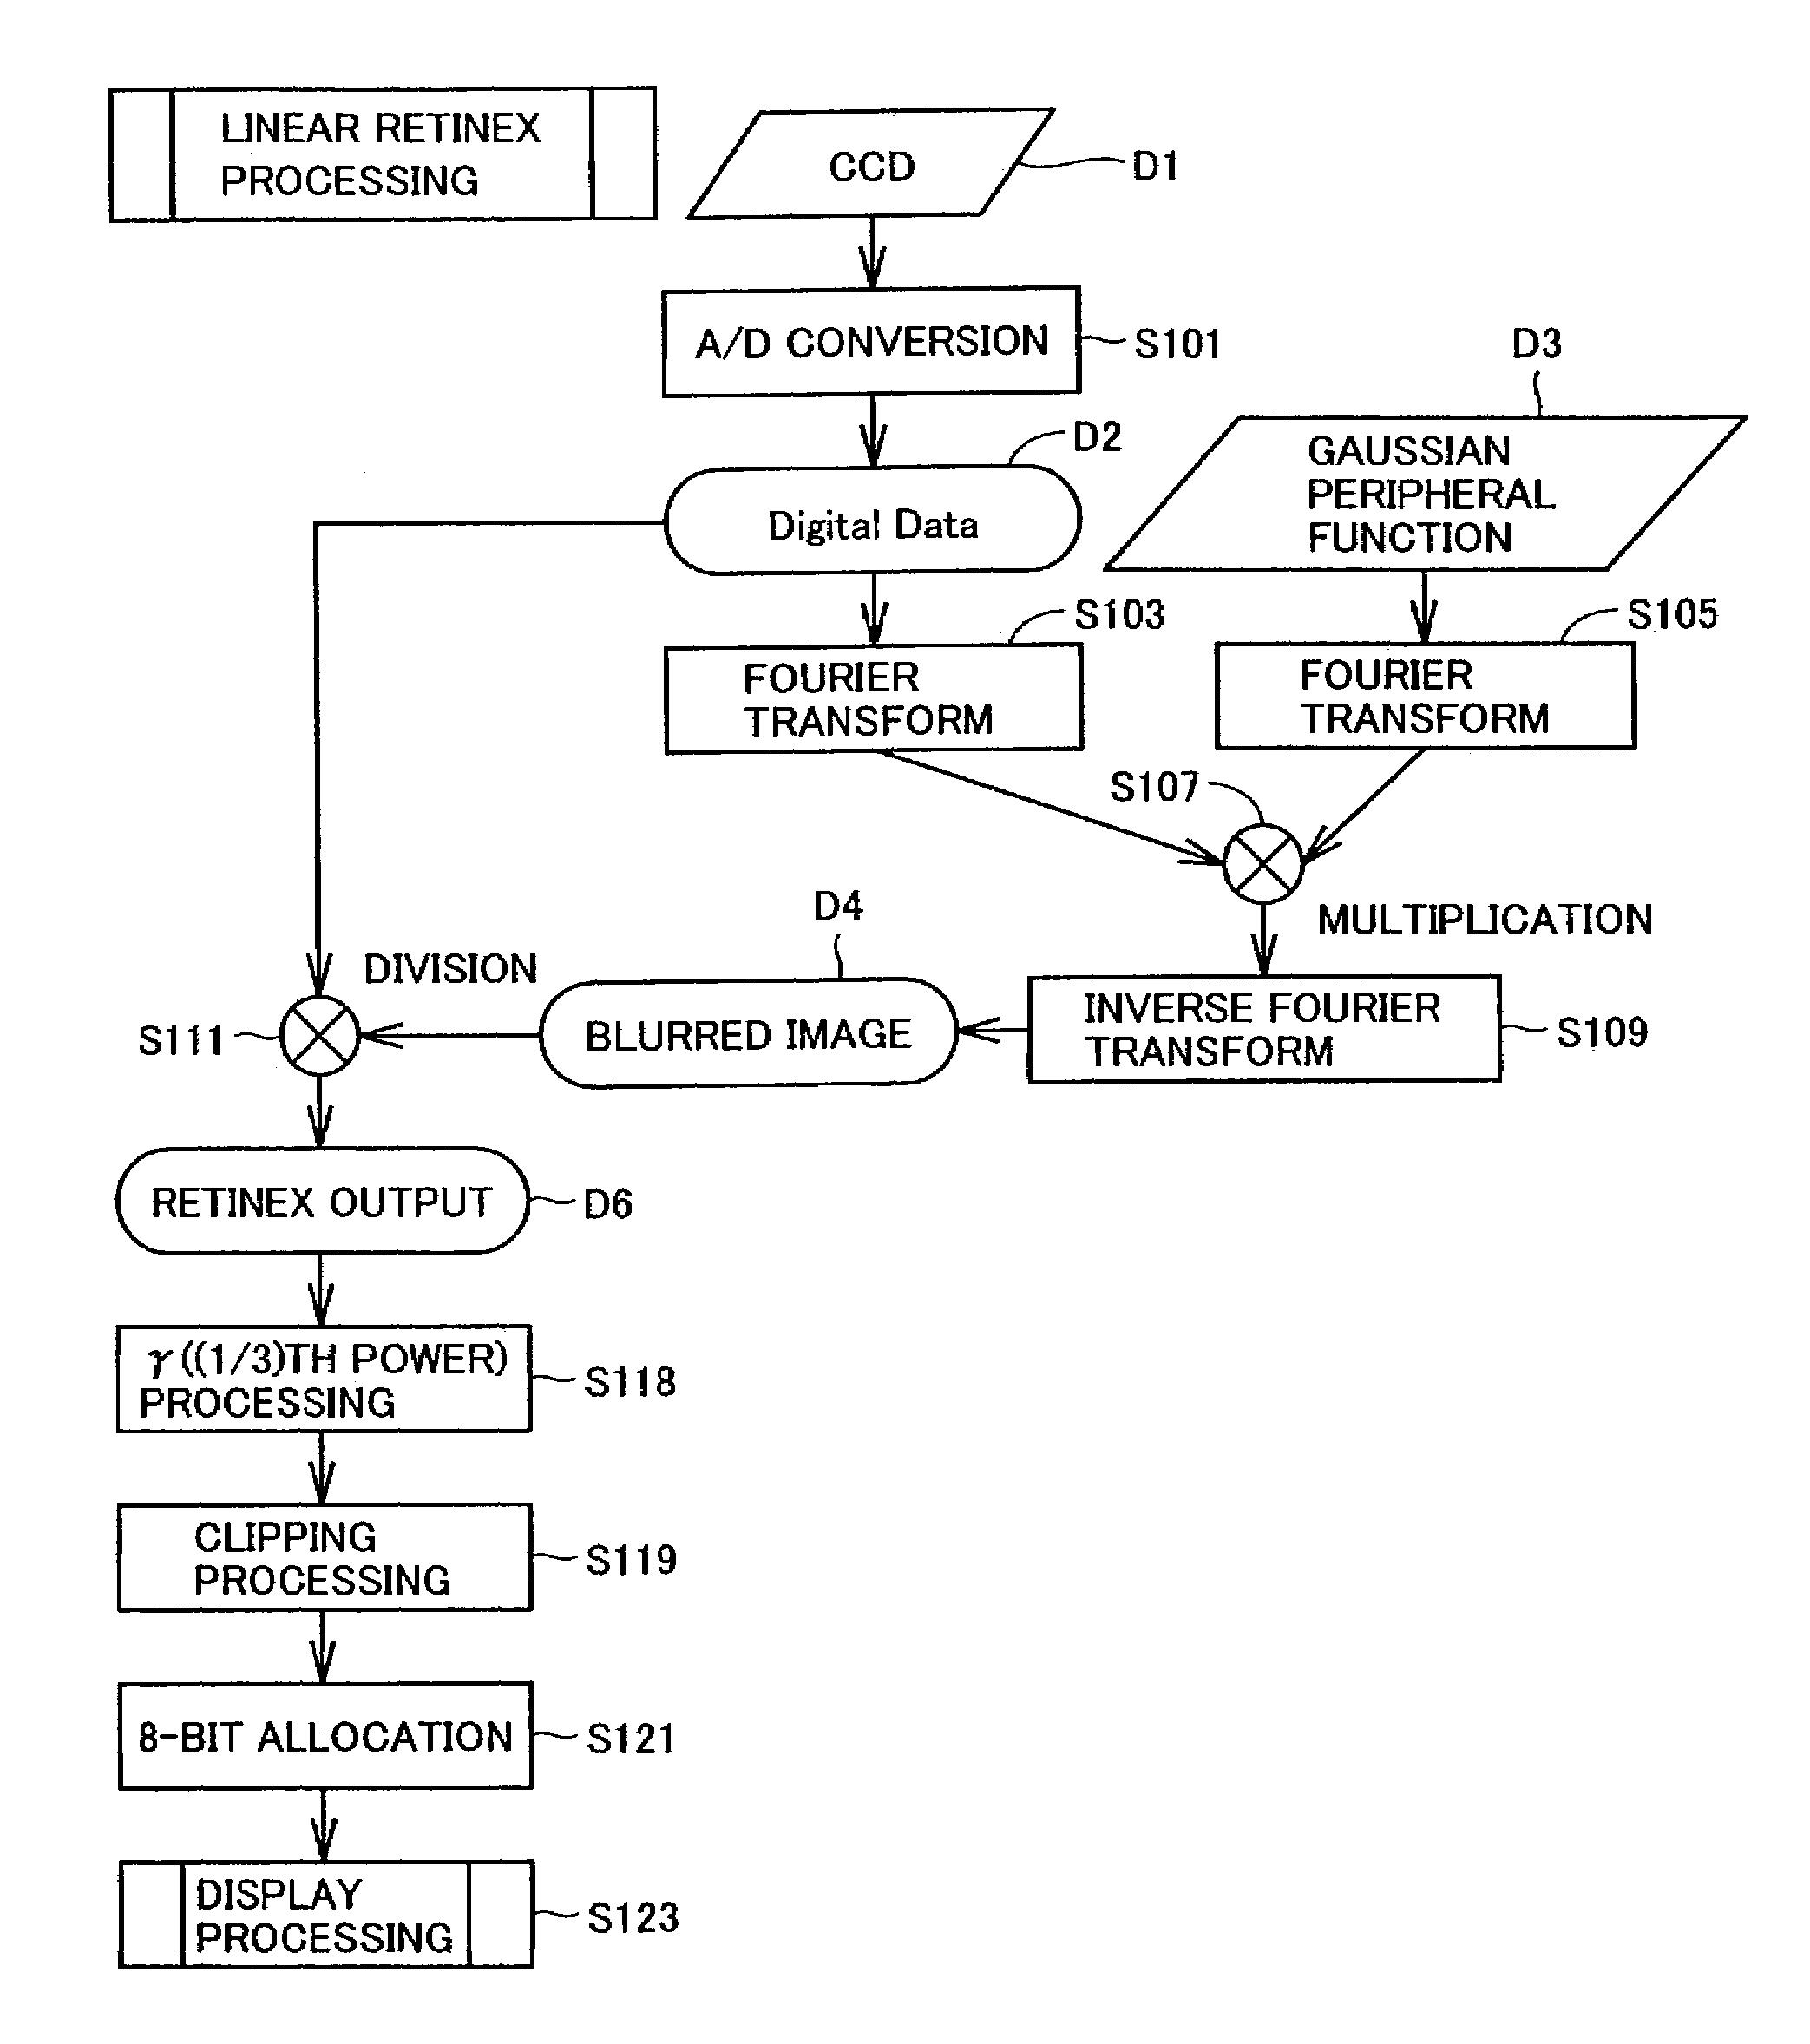 Image processing program product and device for executing Retinex processing